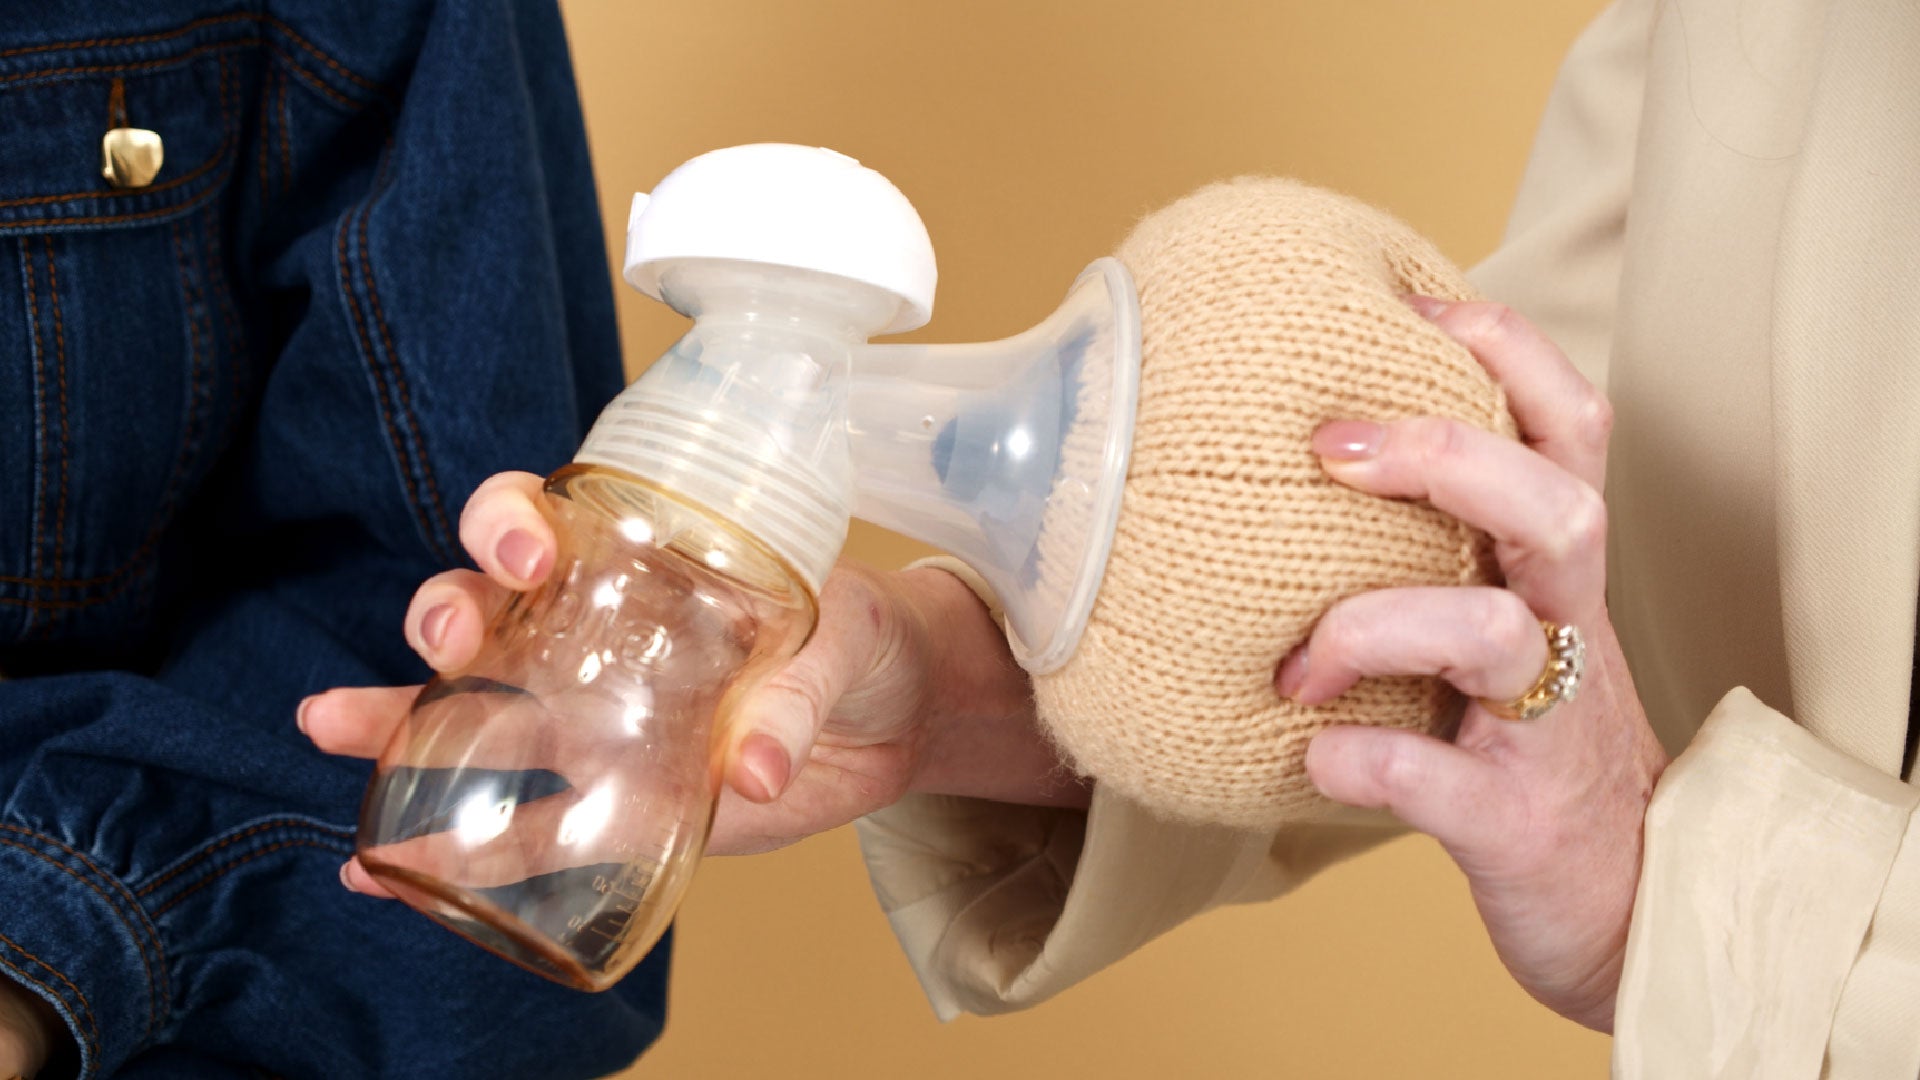 How to fit a breast pump